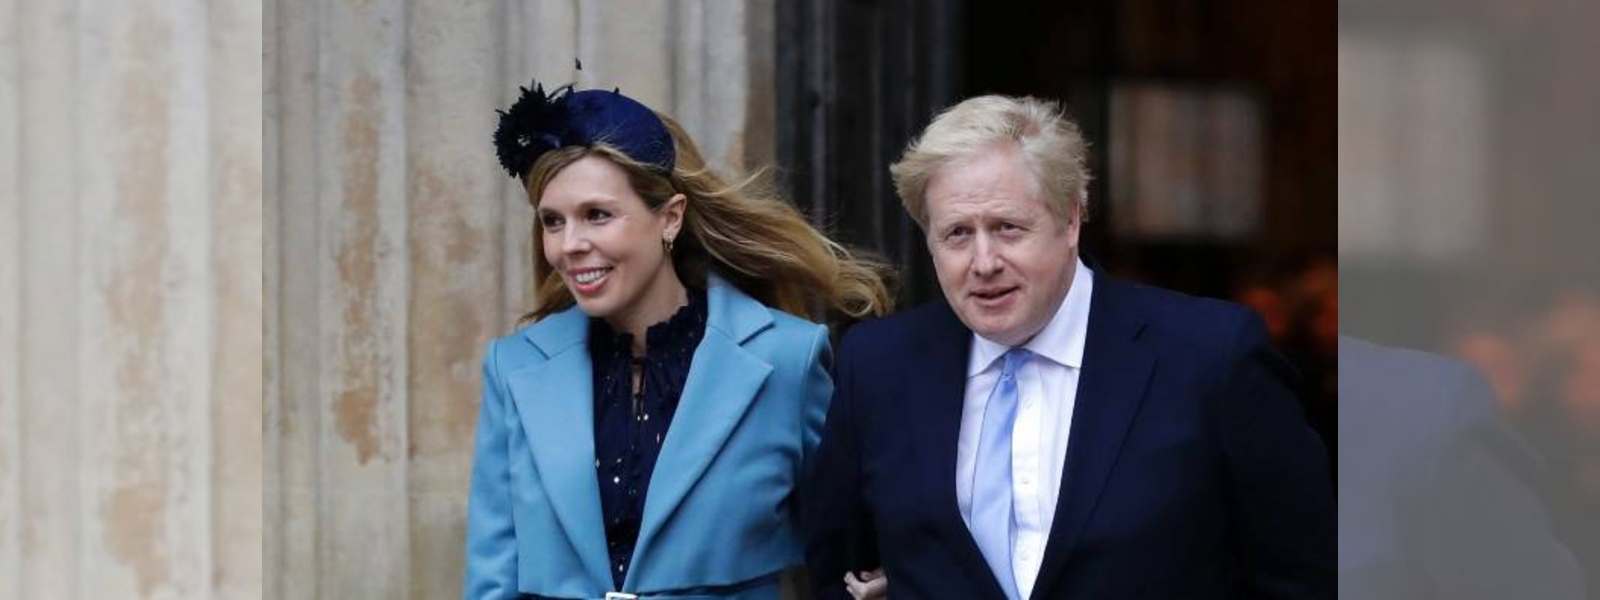 U.K. Prime Minister’s new born baby attratacts more attention amid COVID-19